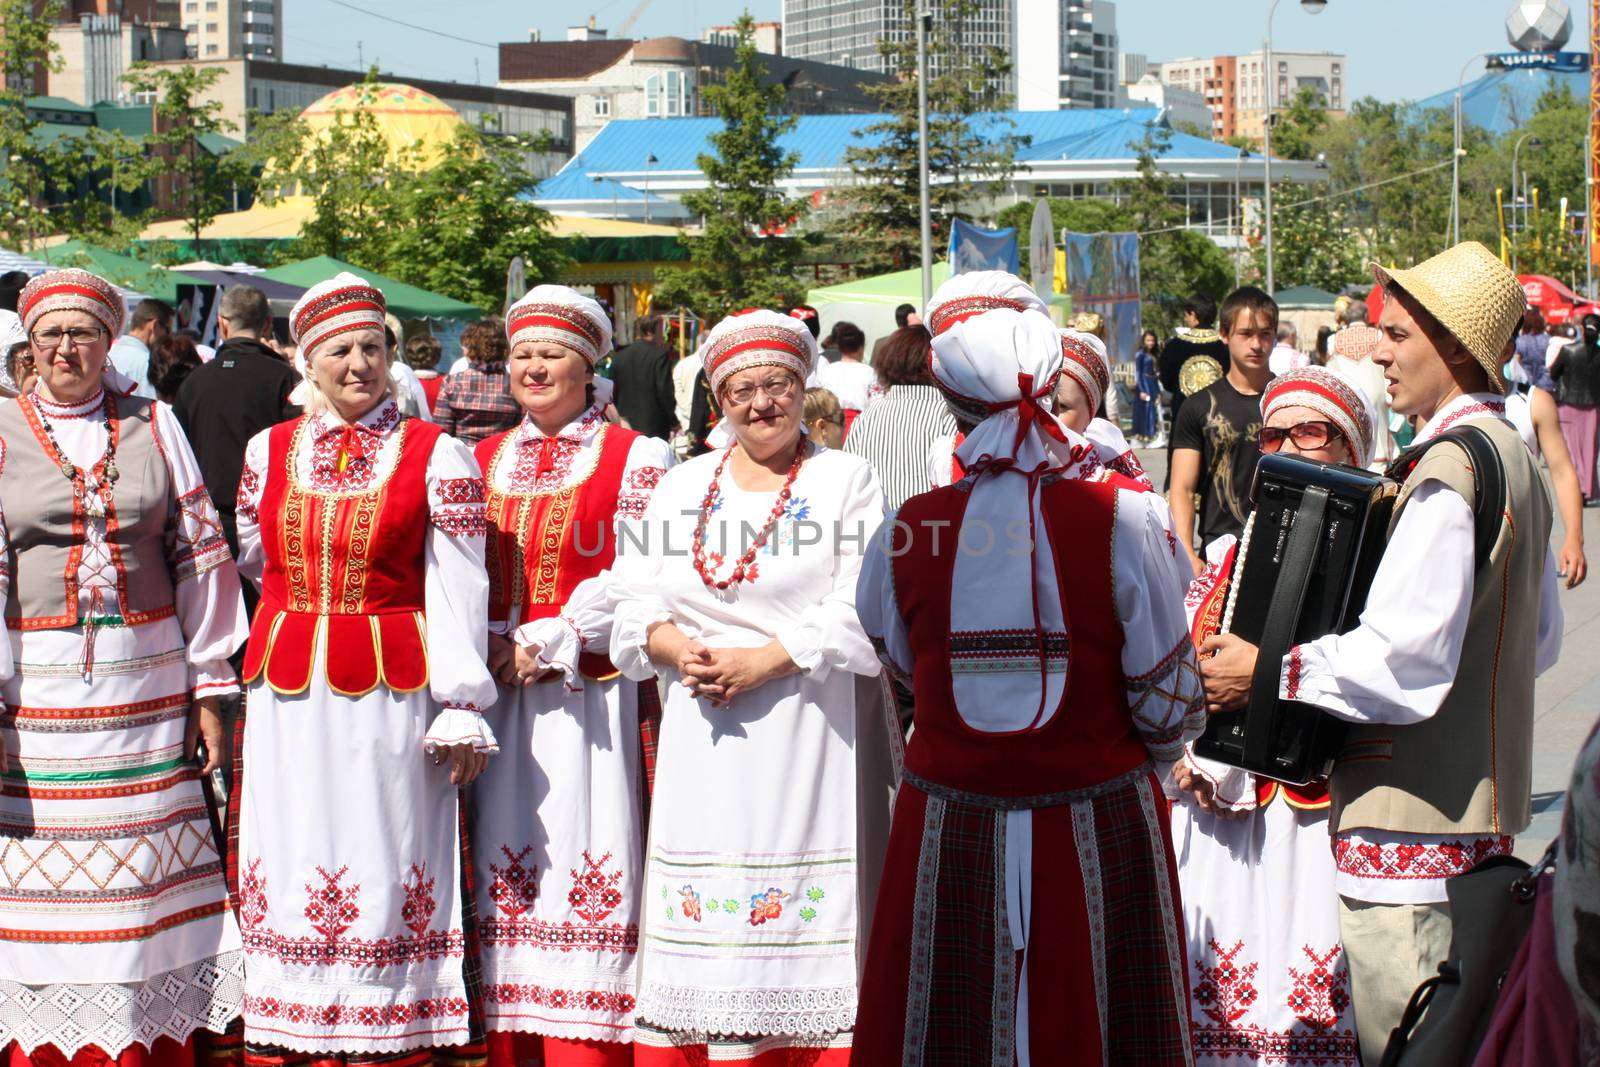 Tyumen, Russia - May 26 2012. Festival of national cultures Friendship Bridge. Peoples in Kazakh national dress ready for a concert. In the backyard are the presentation of the national dishes, show rituals are examples of arts and crafts, conduct master classes of traditional national crafts and trades and local cuisine.